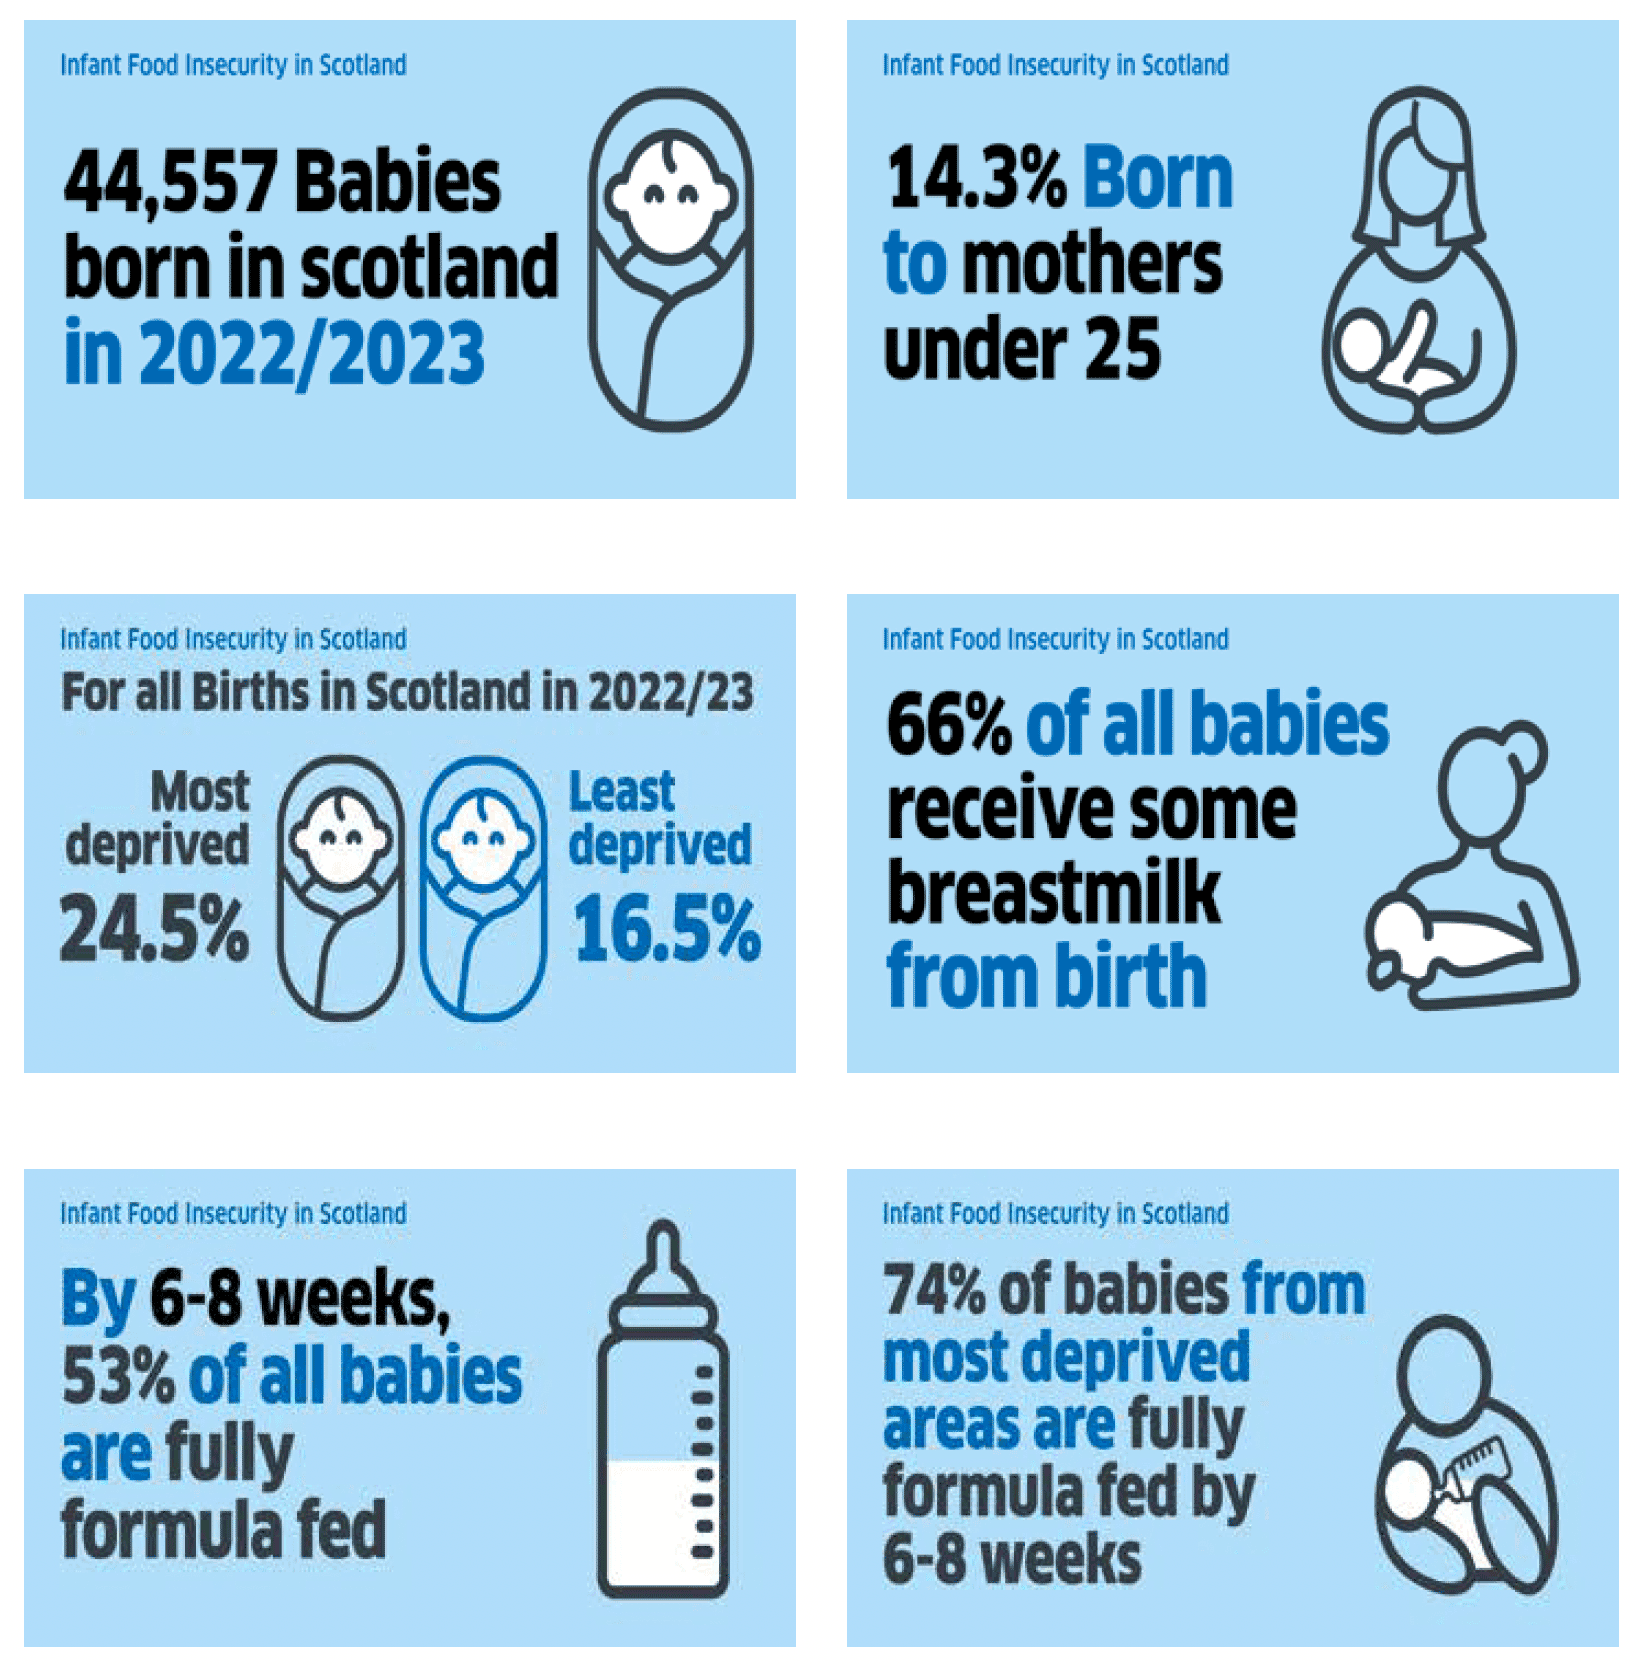 Six infographics showing the key statistics for births in Scotland. 44557 babies born in Scotland in 2023/2024. 14.4 percent born to mothers under 25. For all births in Scotland in 2022/2023 24.5 percent were most deprived and 16.5 percent were least deprived. 66 percent of all babies receive some breastmilk from birth. By 6 to 8 weeks 53 percent of all babies are fully formula fed. 74 percent of babies from most deprived areas are fully formula fed by 6 to 8 weeks